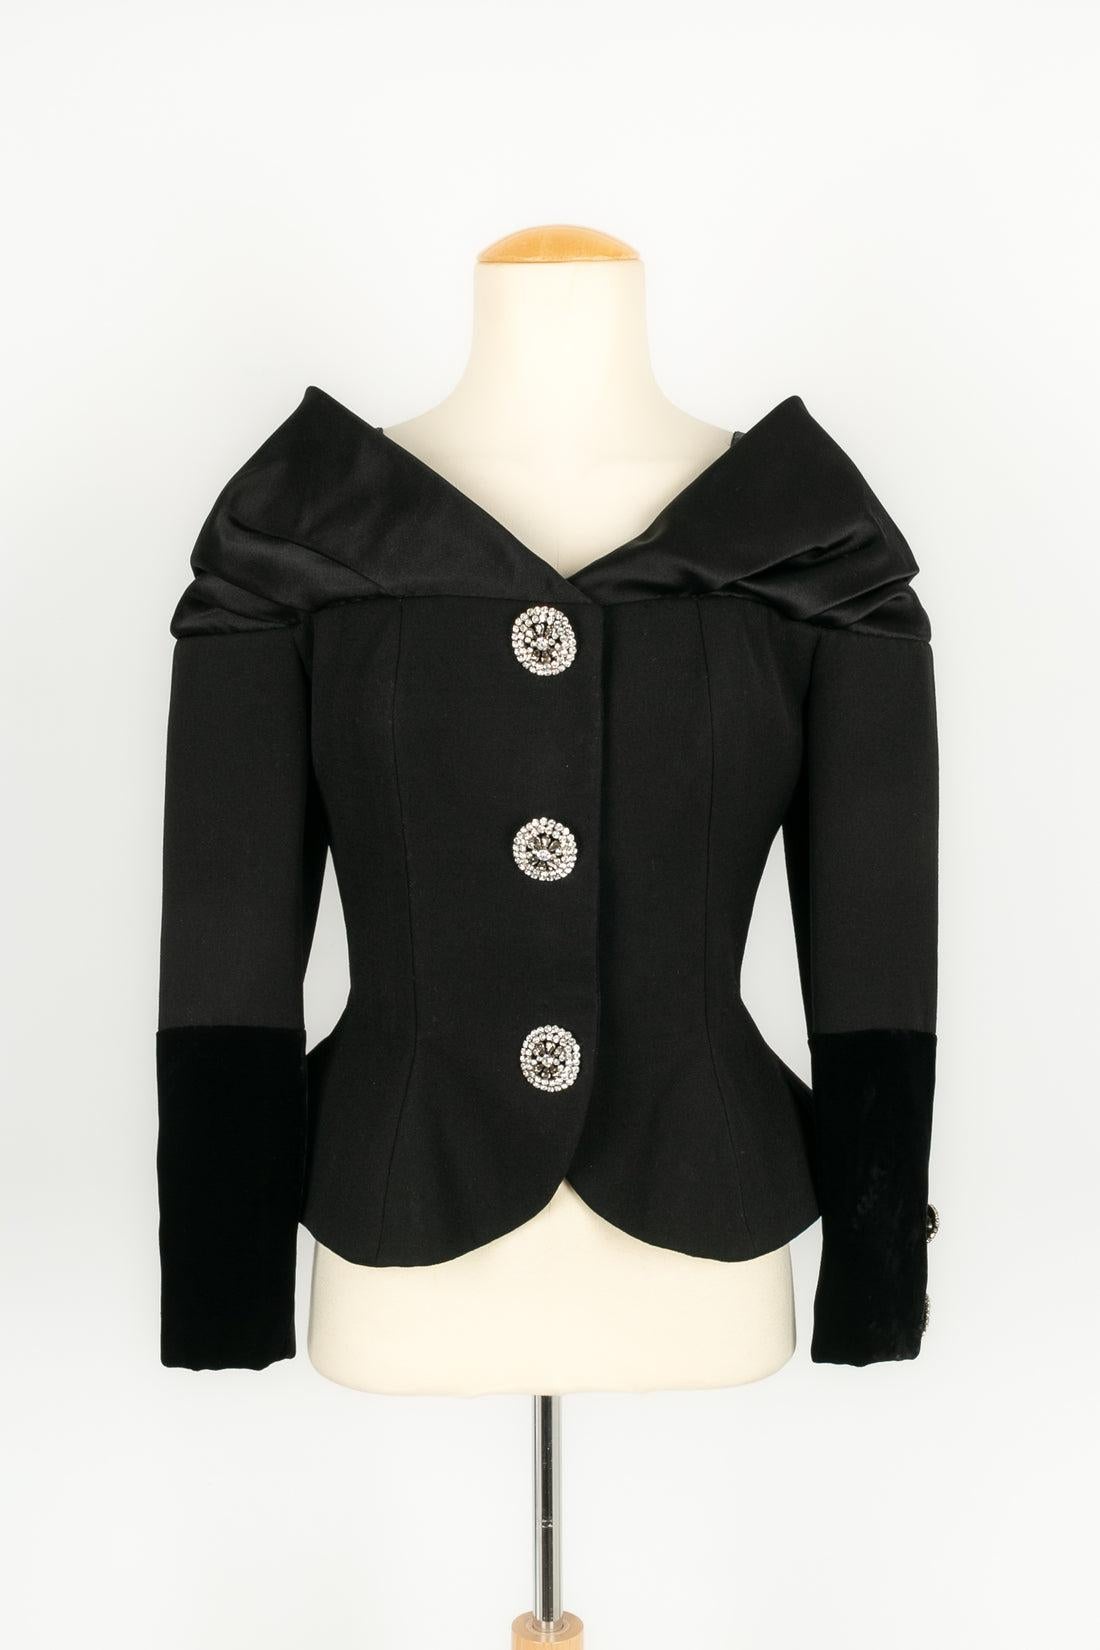 Christian Lacroix Haute Couture Black Jacket and Skirt Set For Sale 2